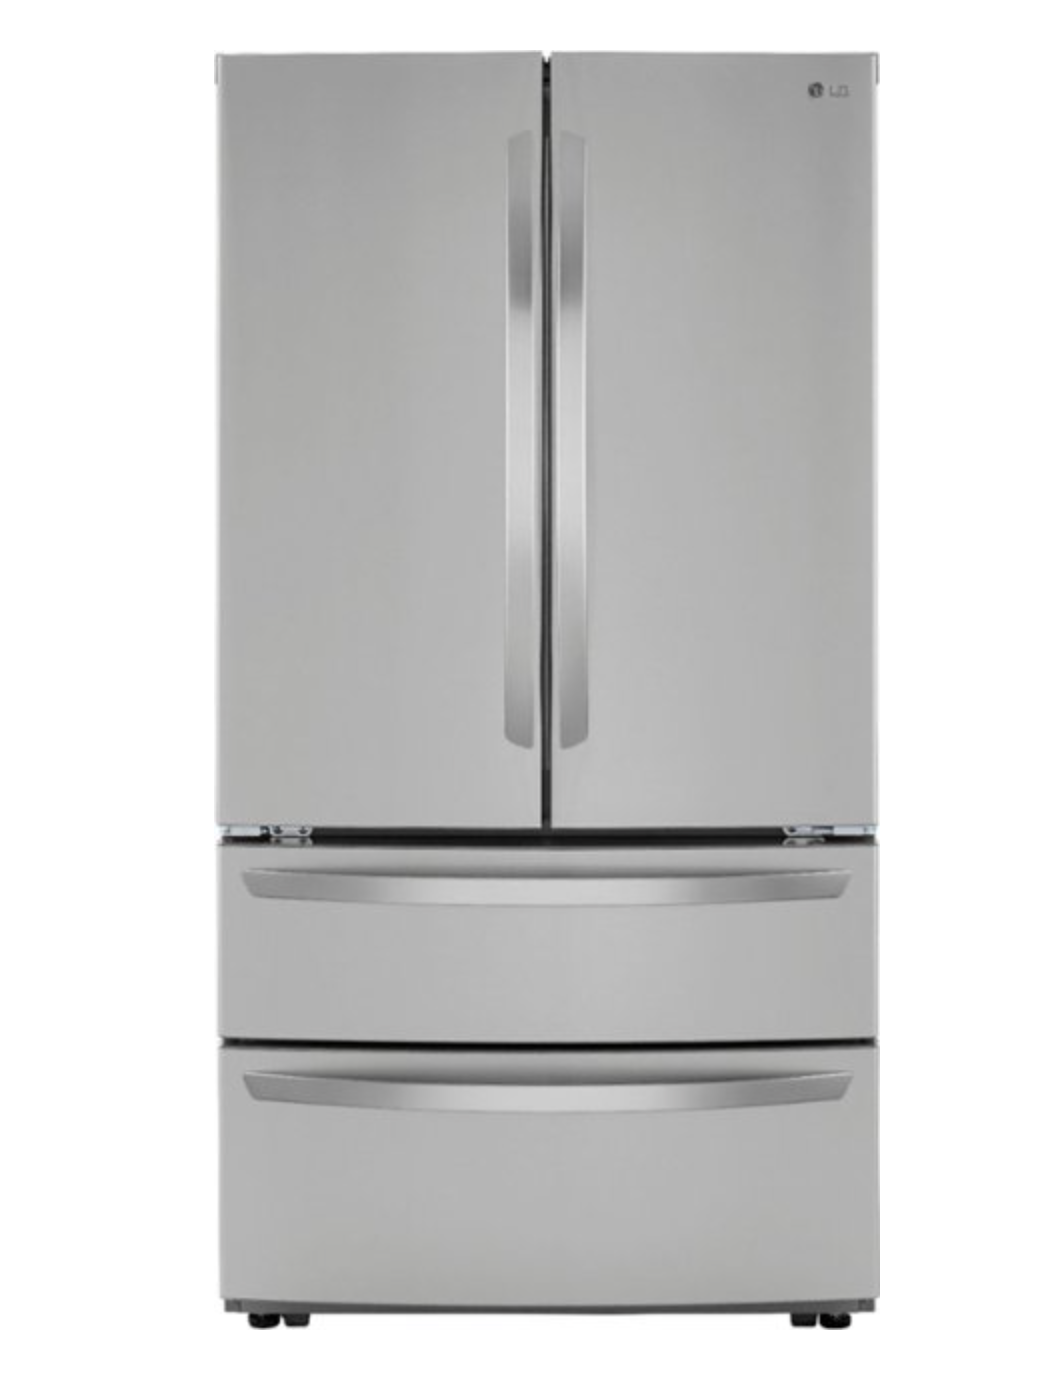 LG - 26.9 Cu. Ft. 4-Door French Door Refrigerator with Internal Water Dispenser - Stainless Steel (very small dent top right corner) – (P)